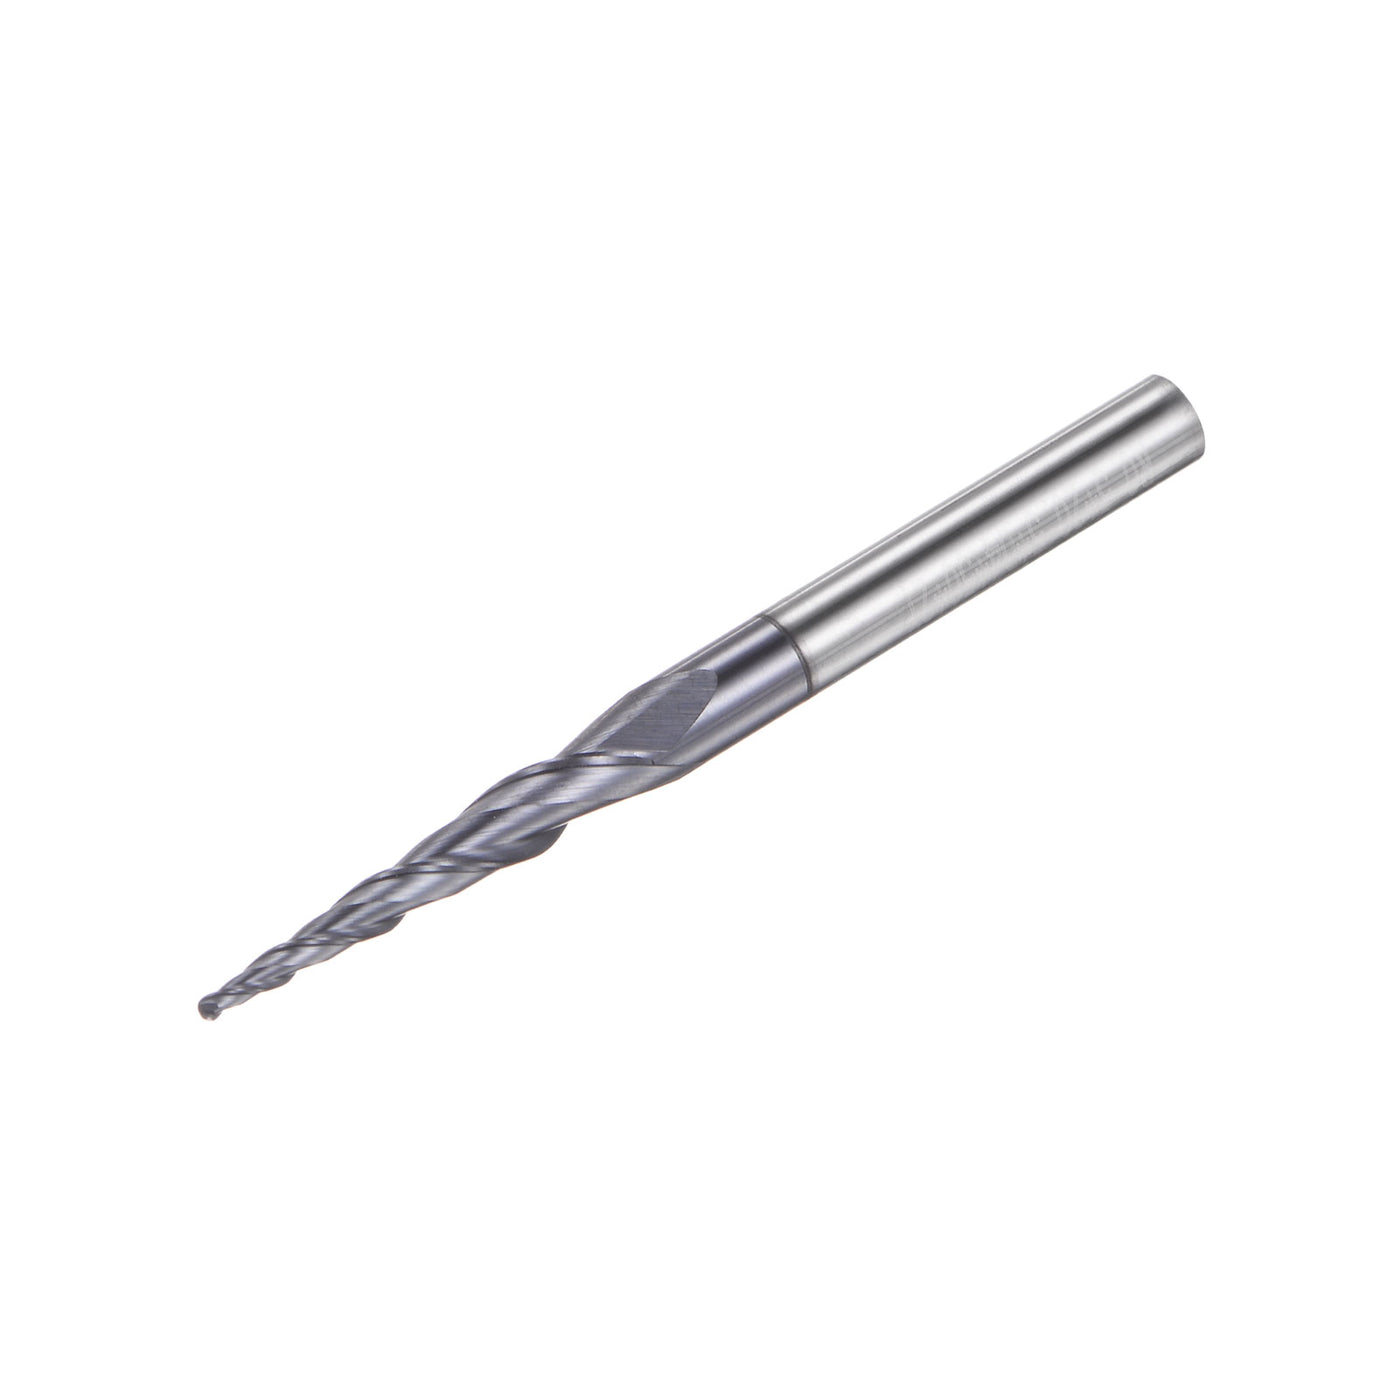 uxcell Uxcell 1mm x 4mm 8.36 Degree Angle TiSiN Coated Carbide Tapered Ball Nose End Mill